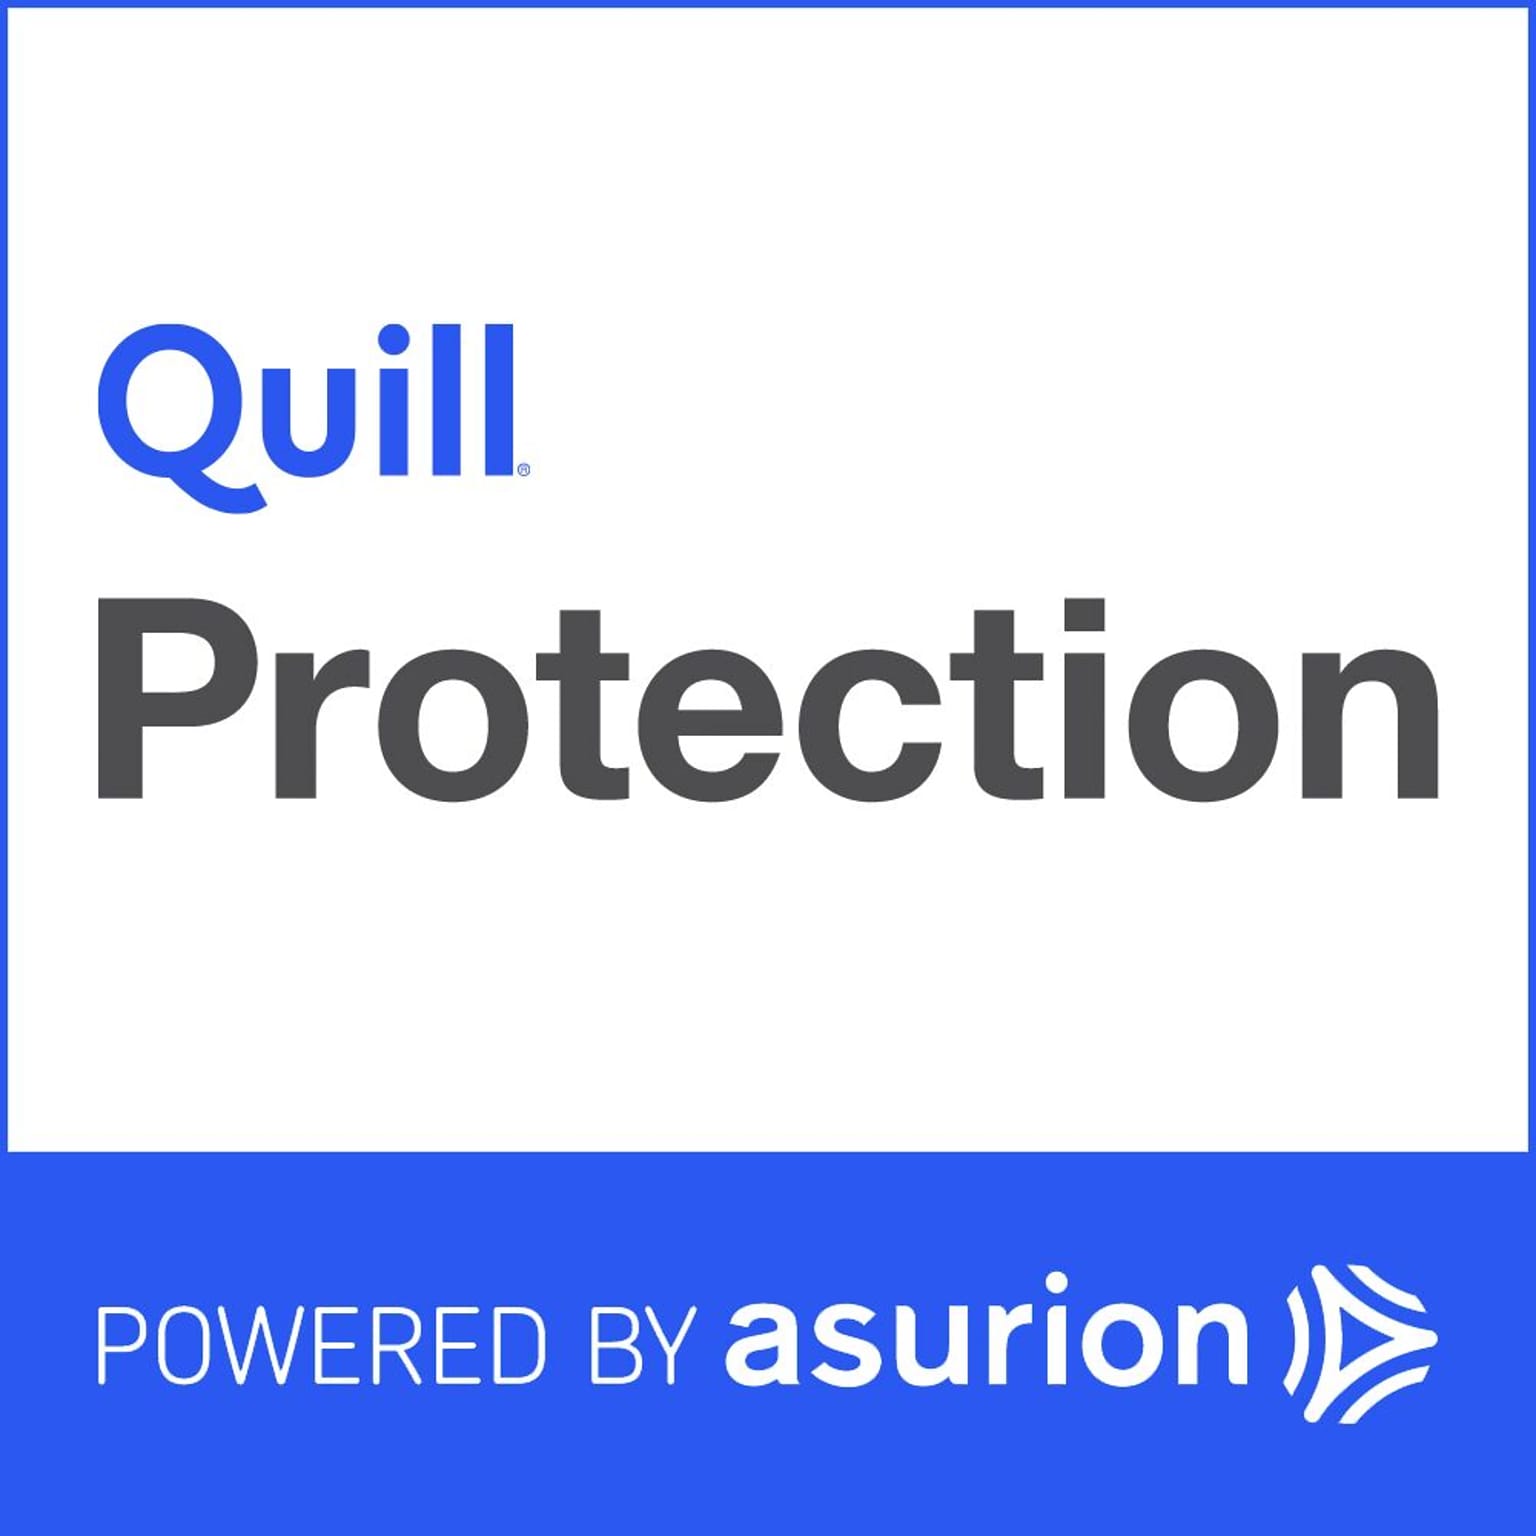 Quill.com 3 Year Protection Plan $30-$59.99